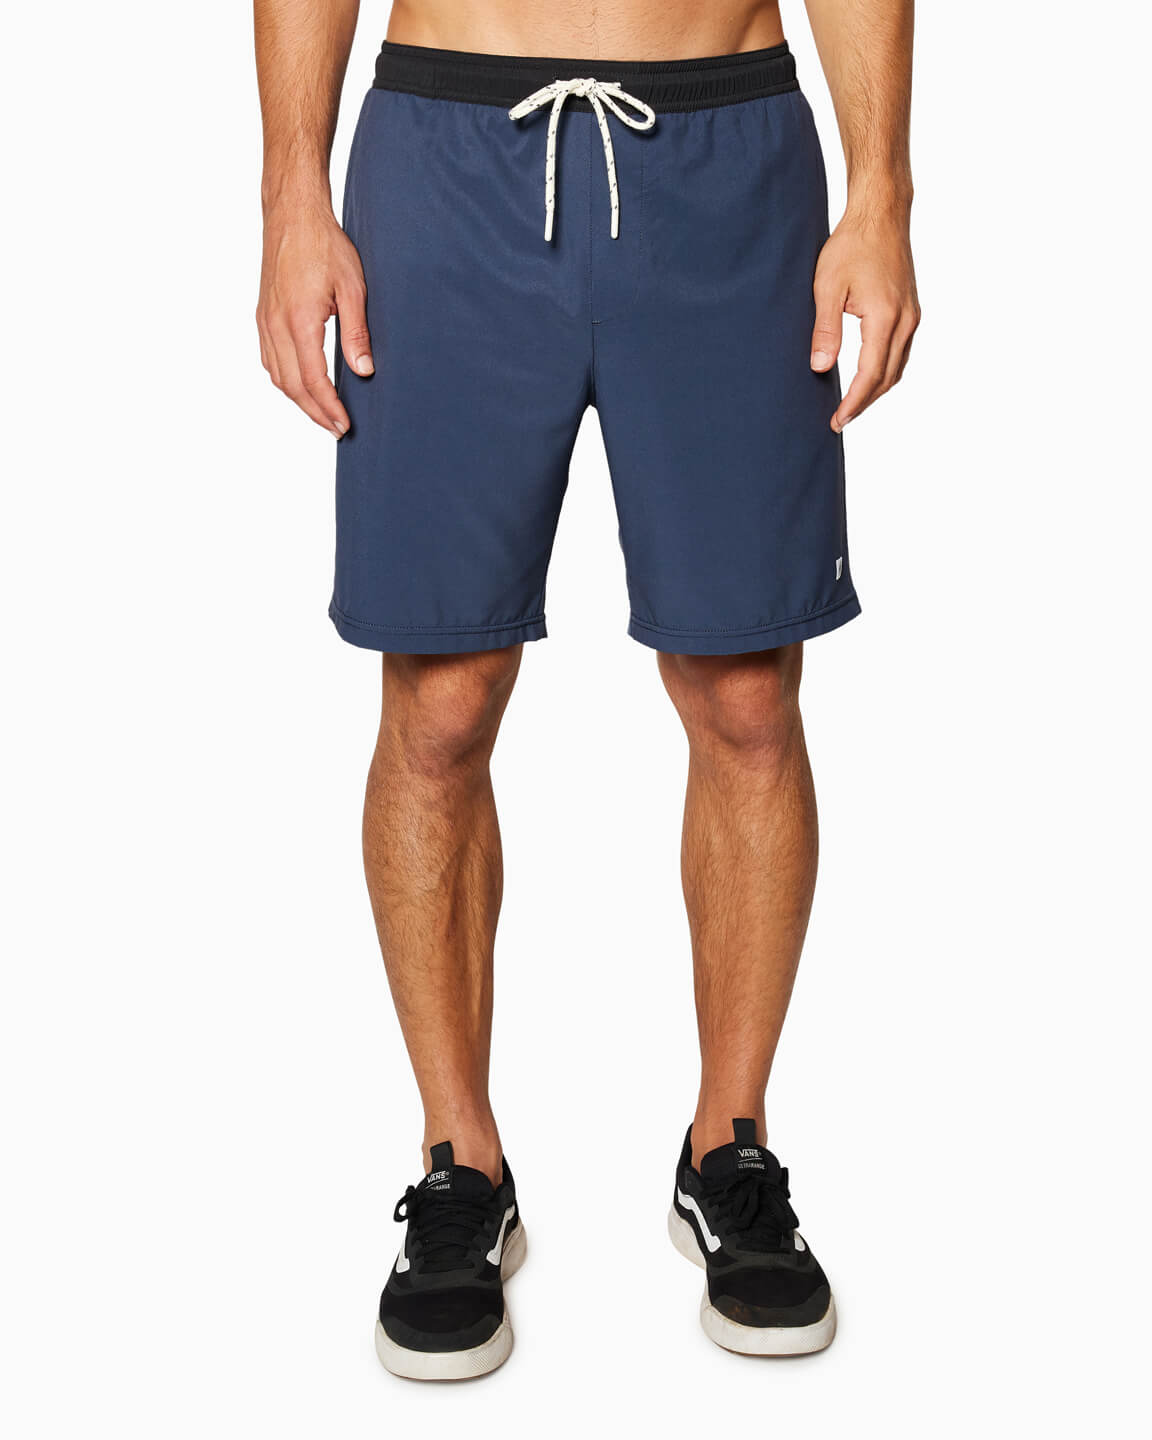 Offshore | Athletic Short NAVY front #color_navy